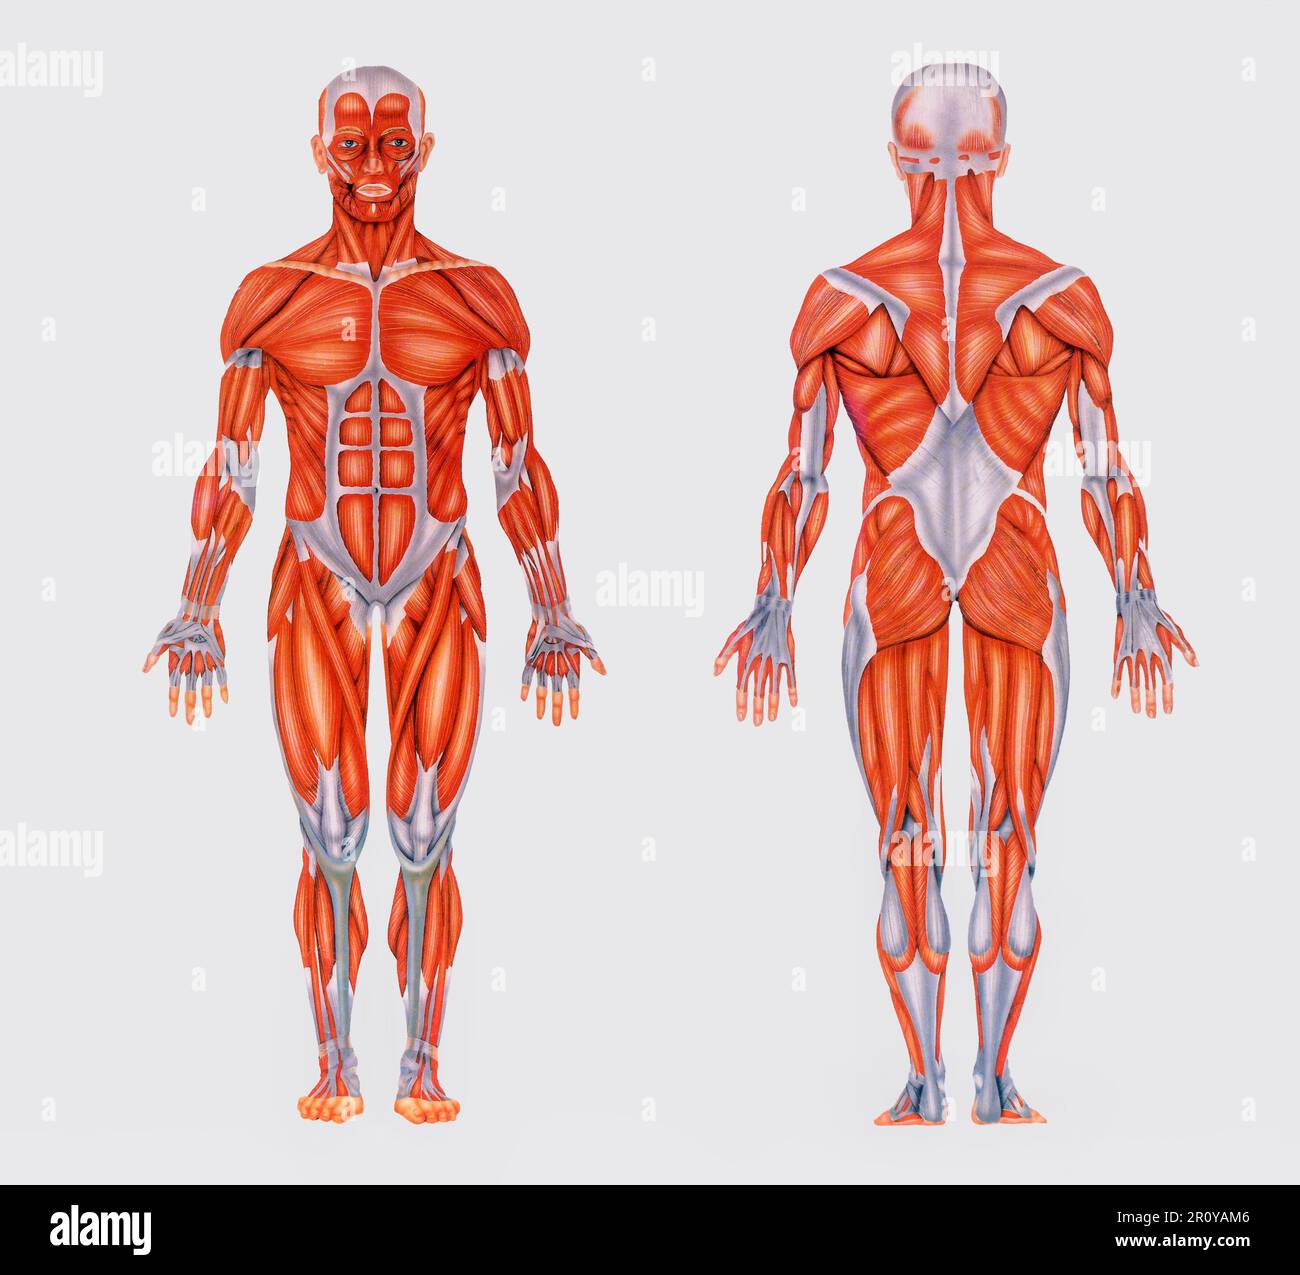 Simple vintage chart with image of full anatomy showing muscles of human body Stock Photo